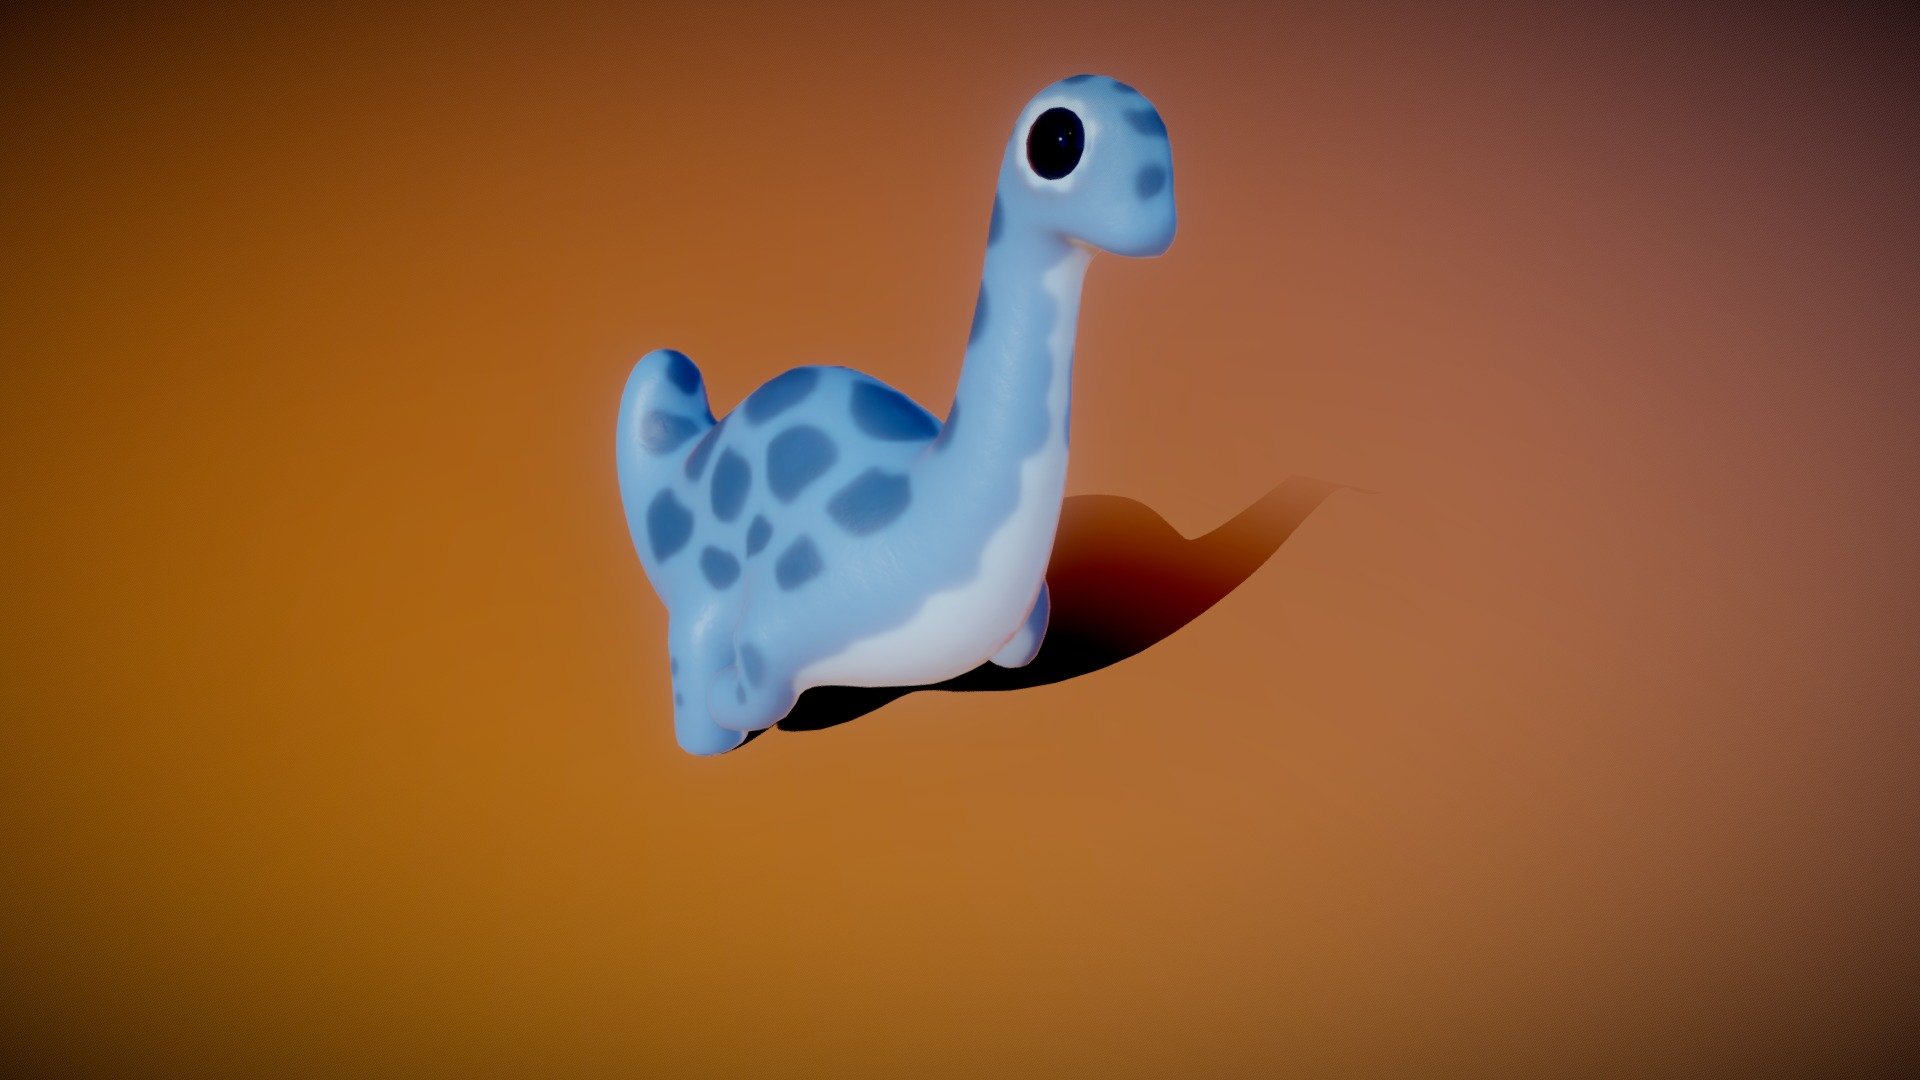 A running baby dino. The rig needs some work to get more out of it 3d model